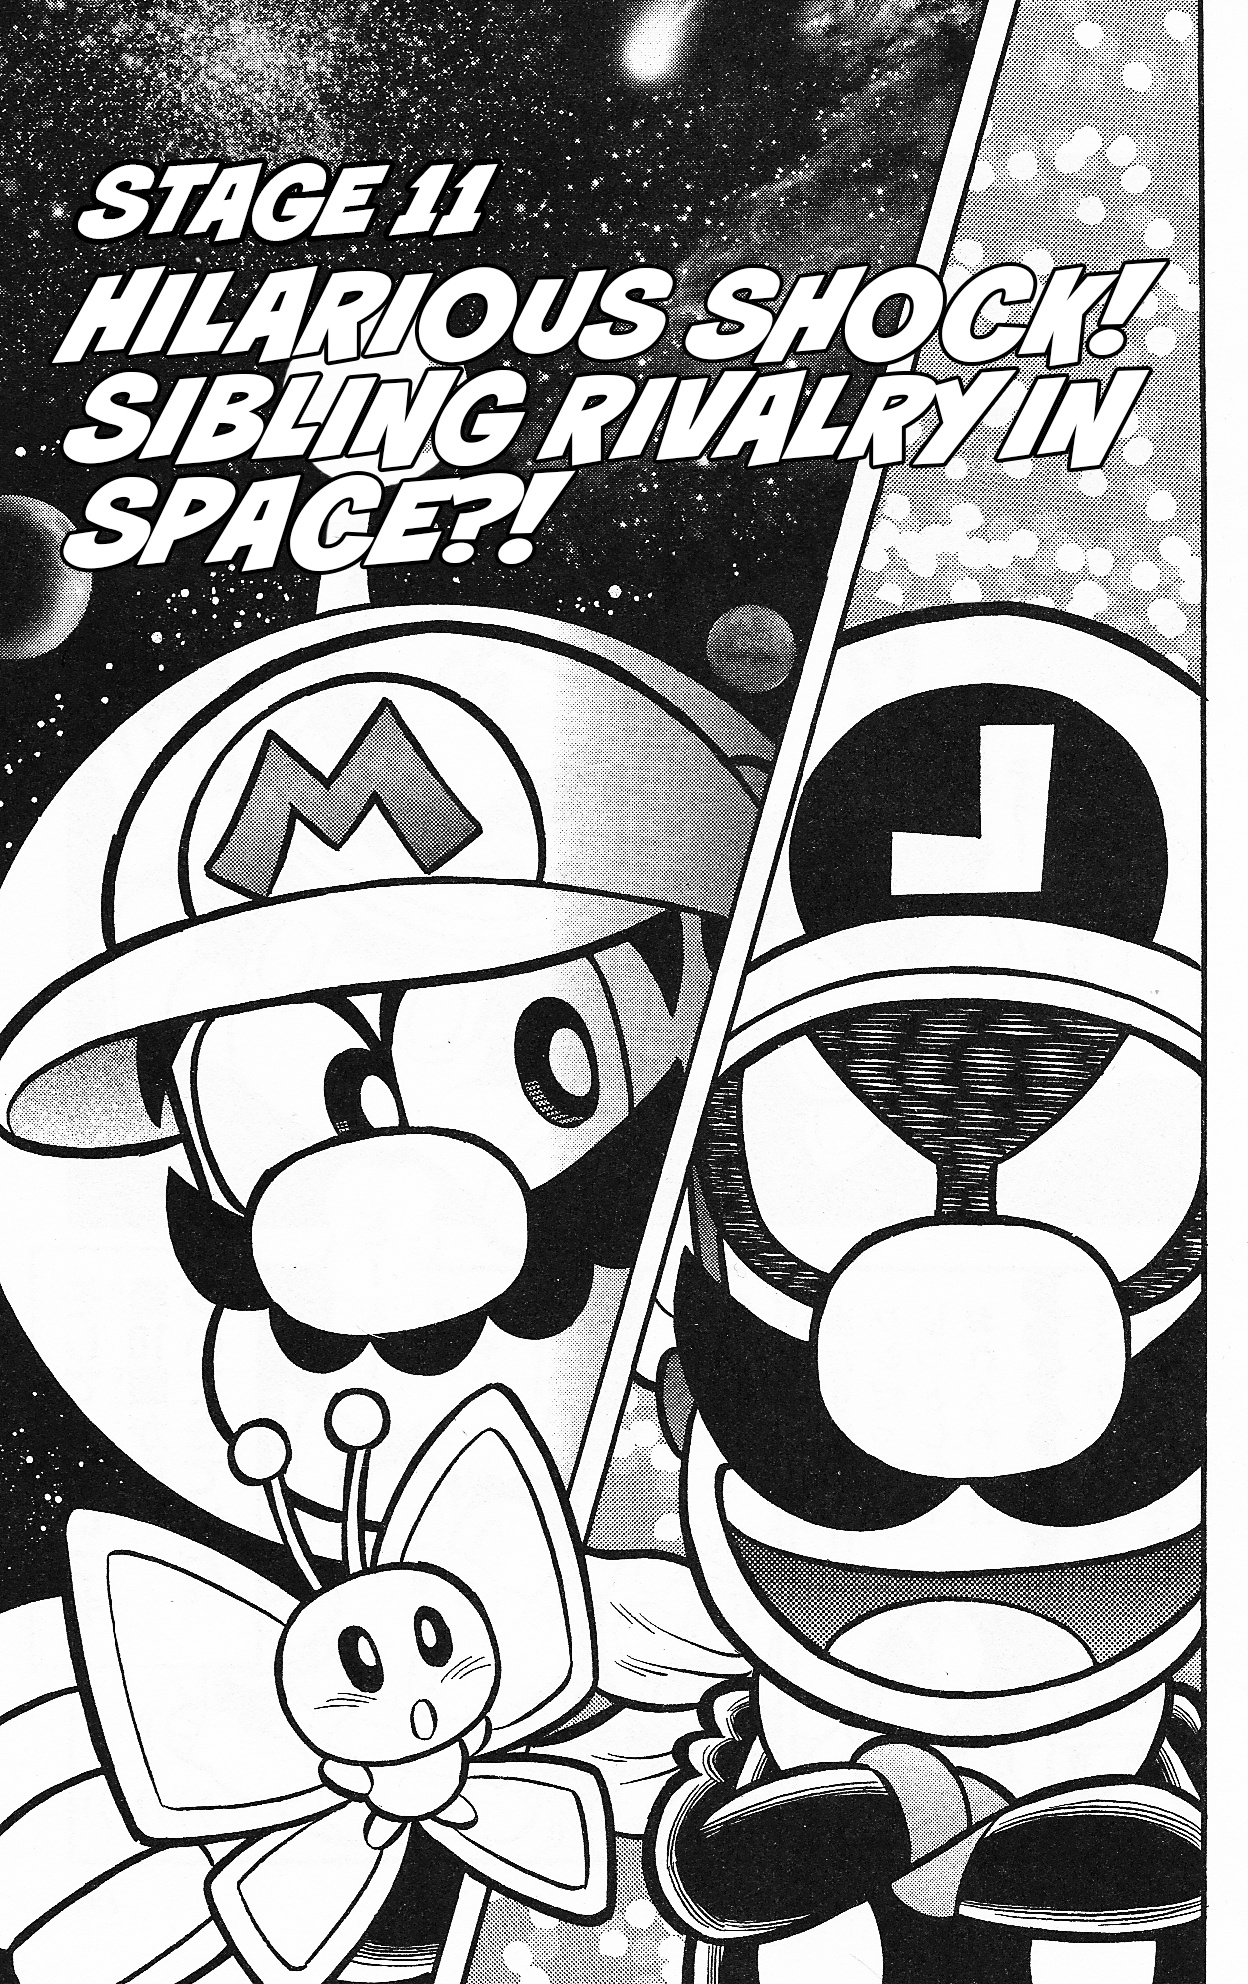 Super Mario-Kun Vol.37 Chapter 11: Hilarious Shock! Sibling Rivalry In Space?! - Picture 1